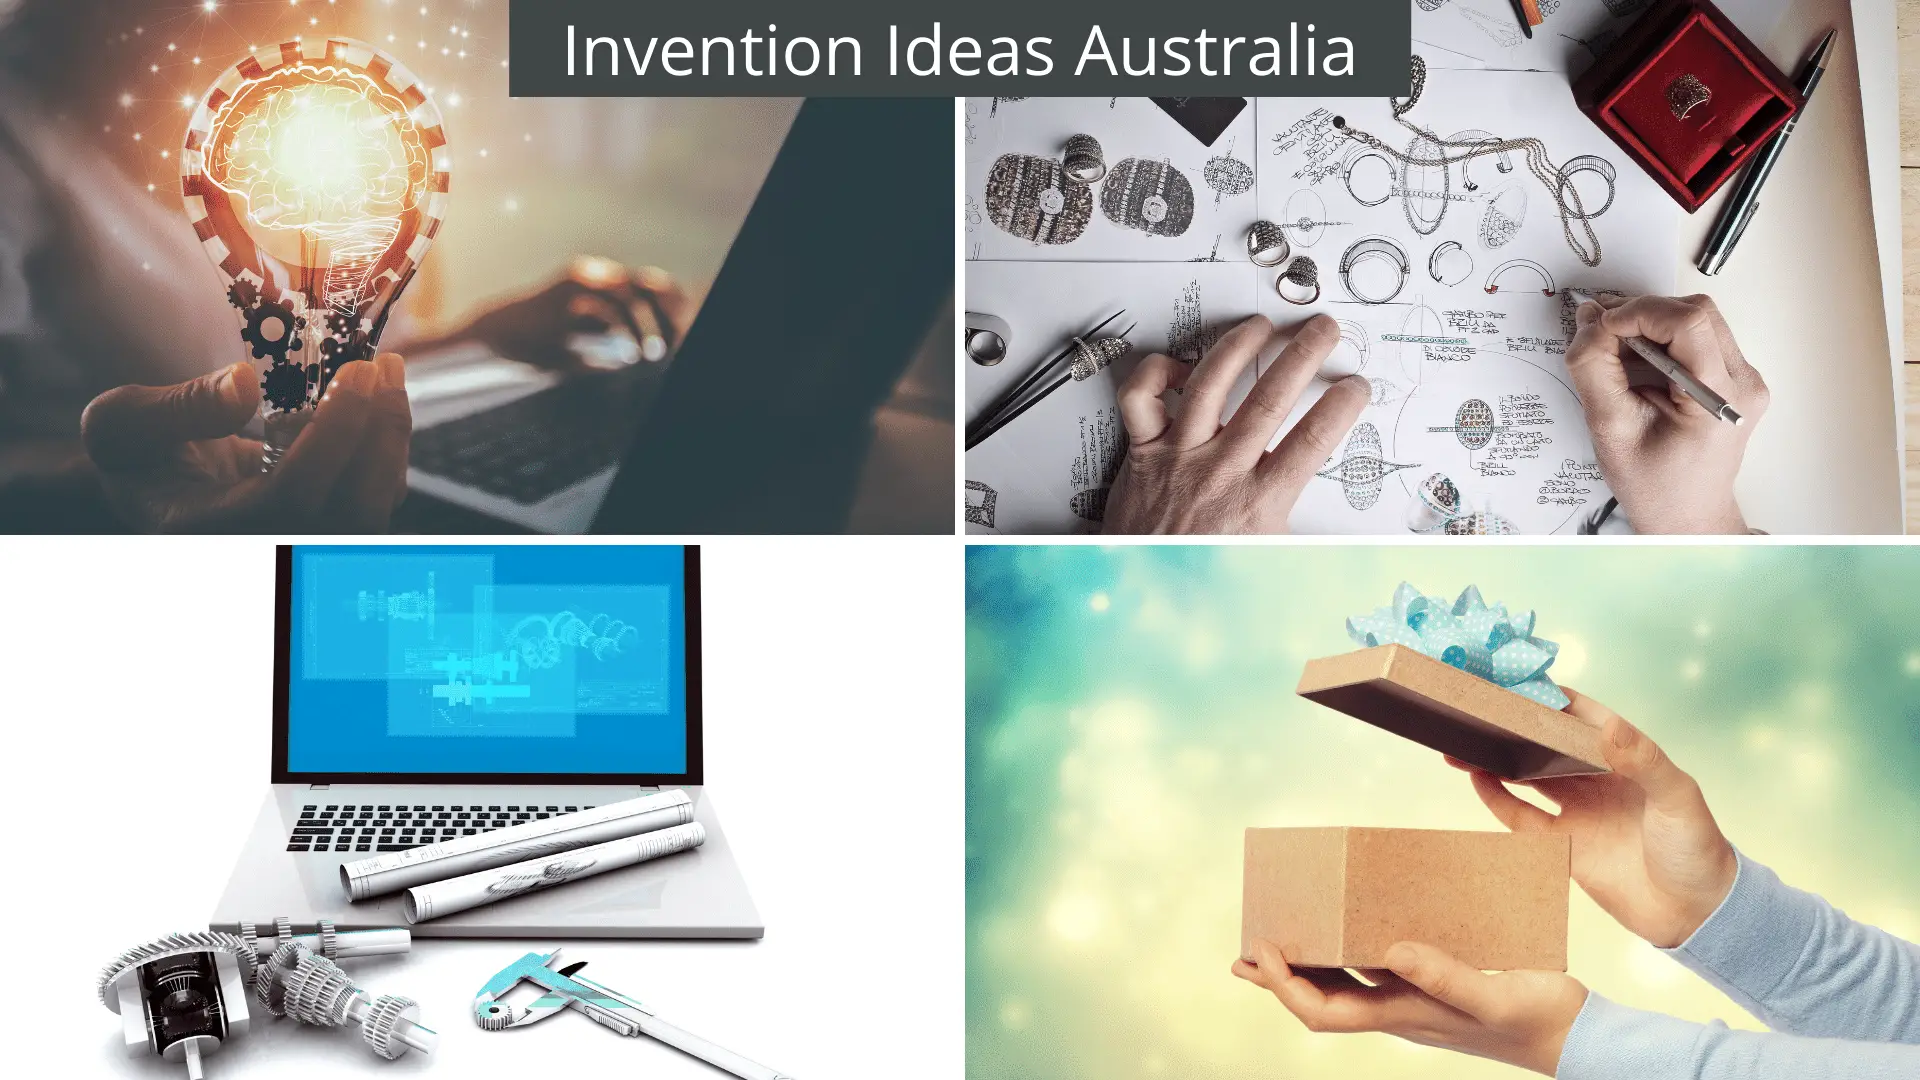 Where To Go With Invention Ideas Australia - 5 Steps To Product